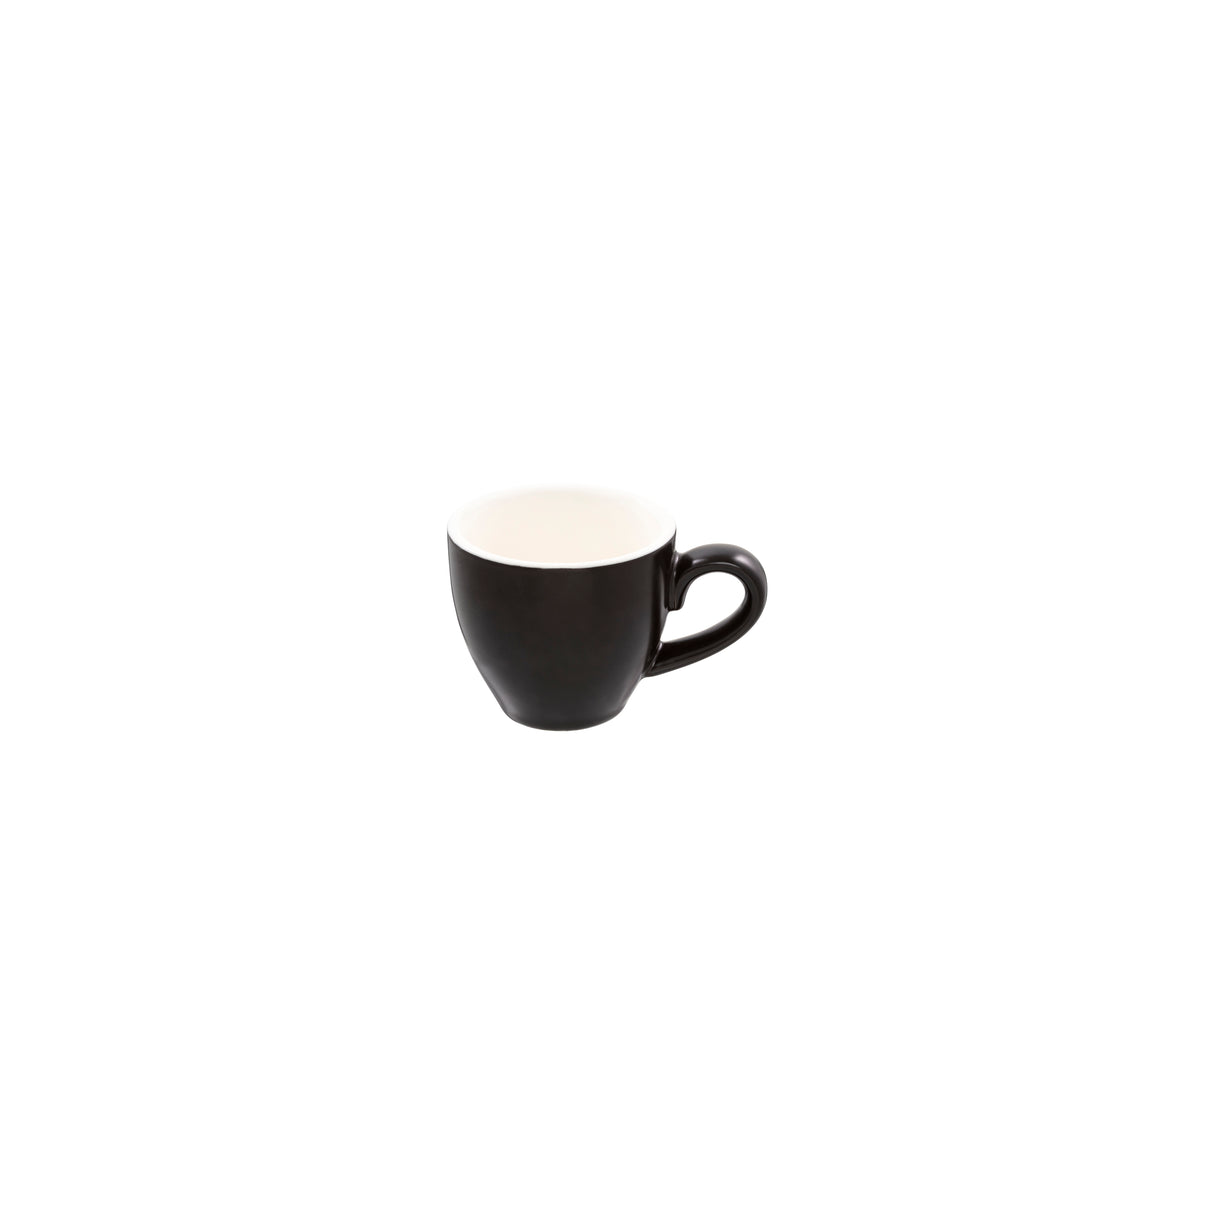 Espresso Cup - Raven, 75ml: Pack of 6